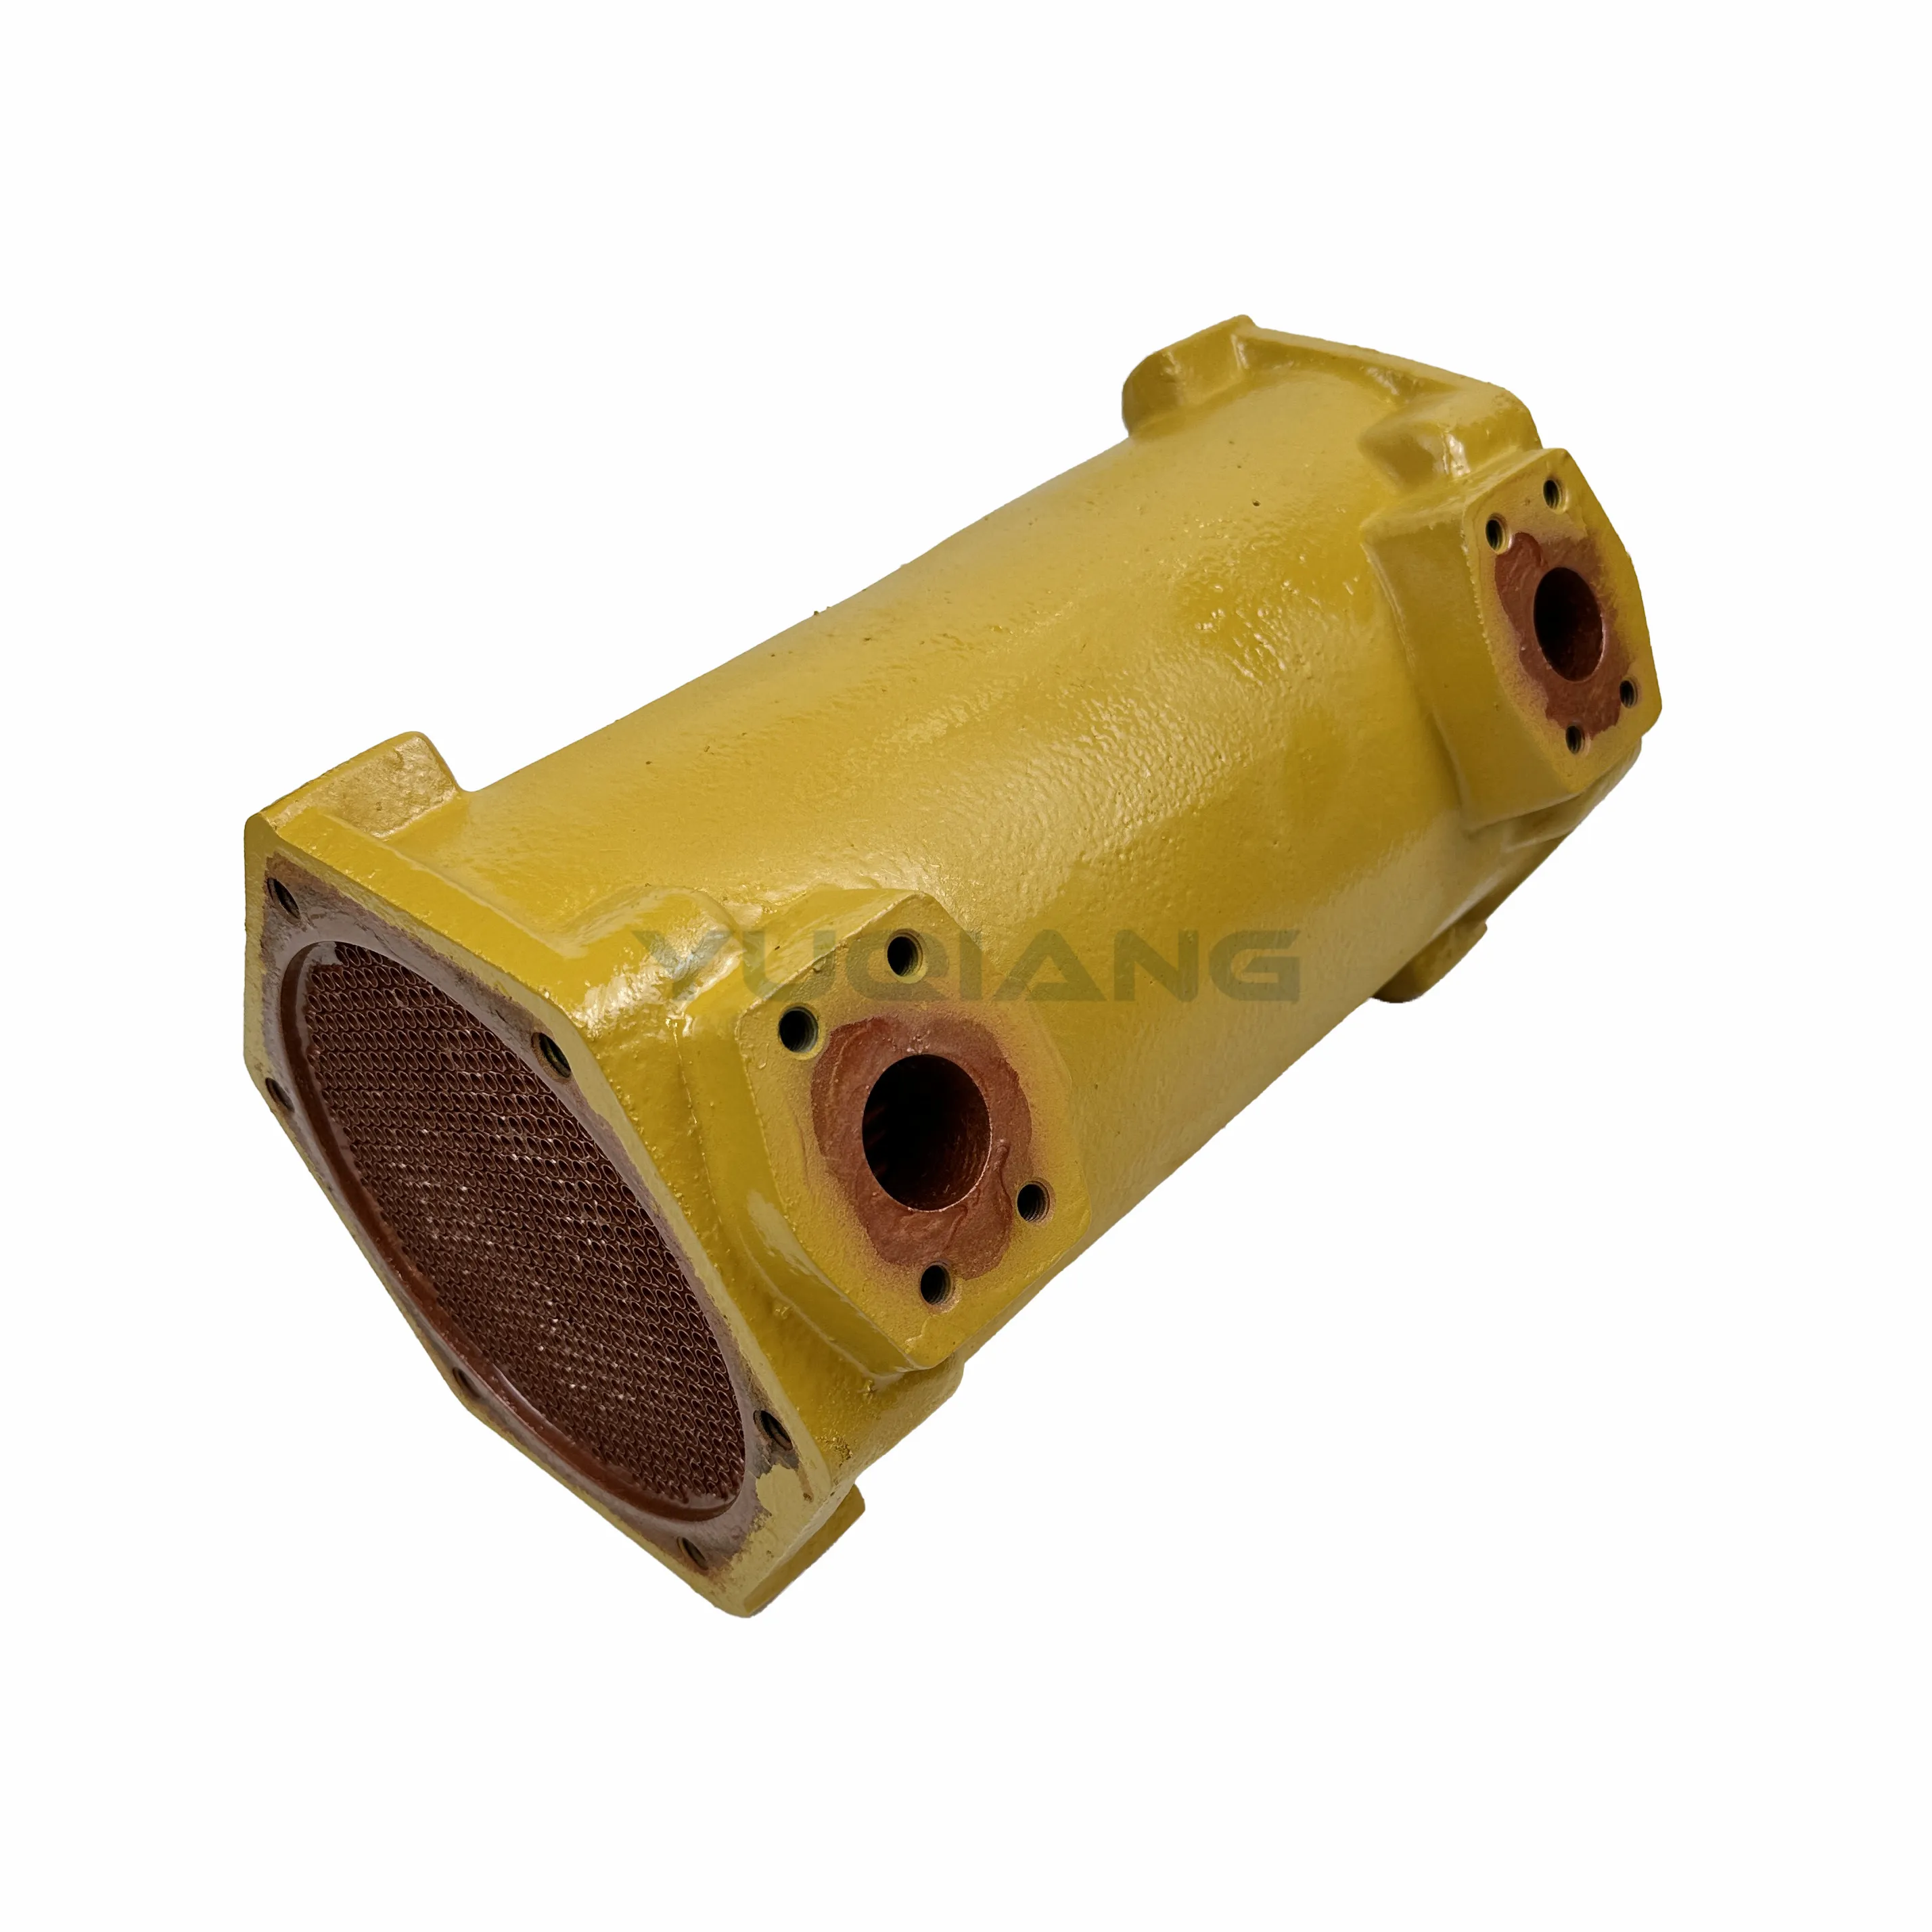 Machinery Engine Pipe Oil Cooler 127-5537 1N-3082 1W5033 For Caterpillar Wheel Loaders 966F 950F 970F